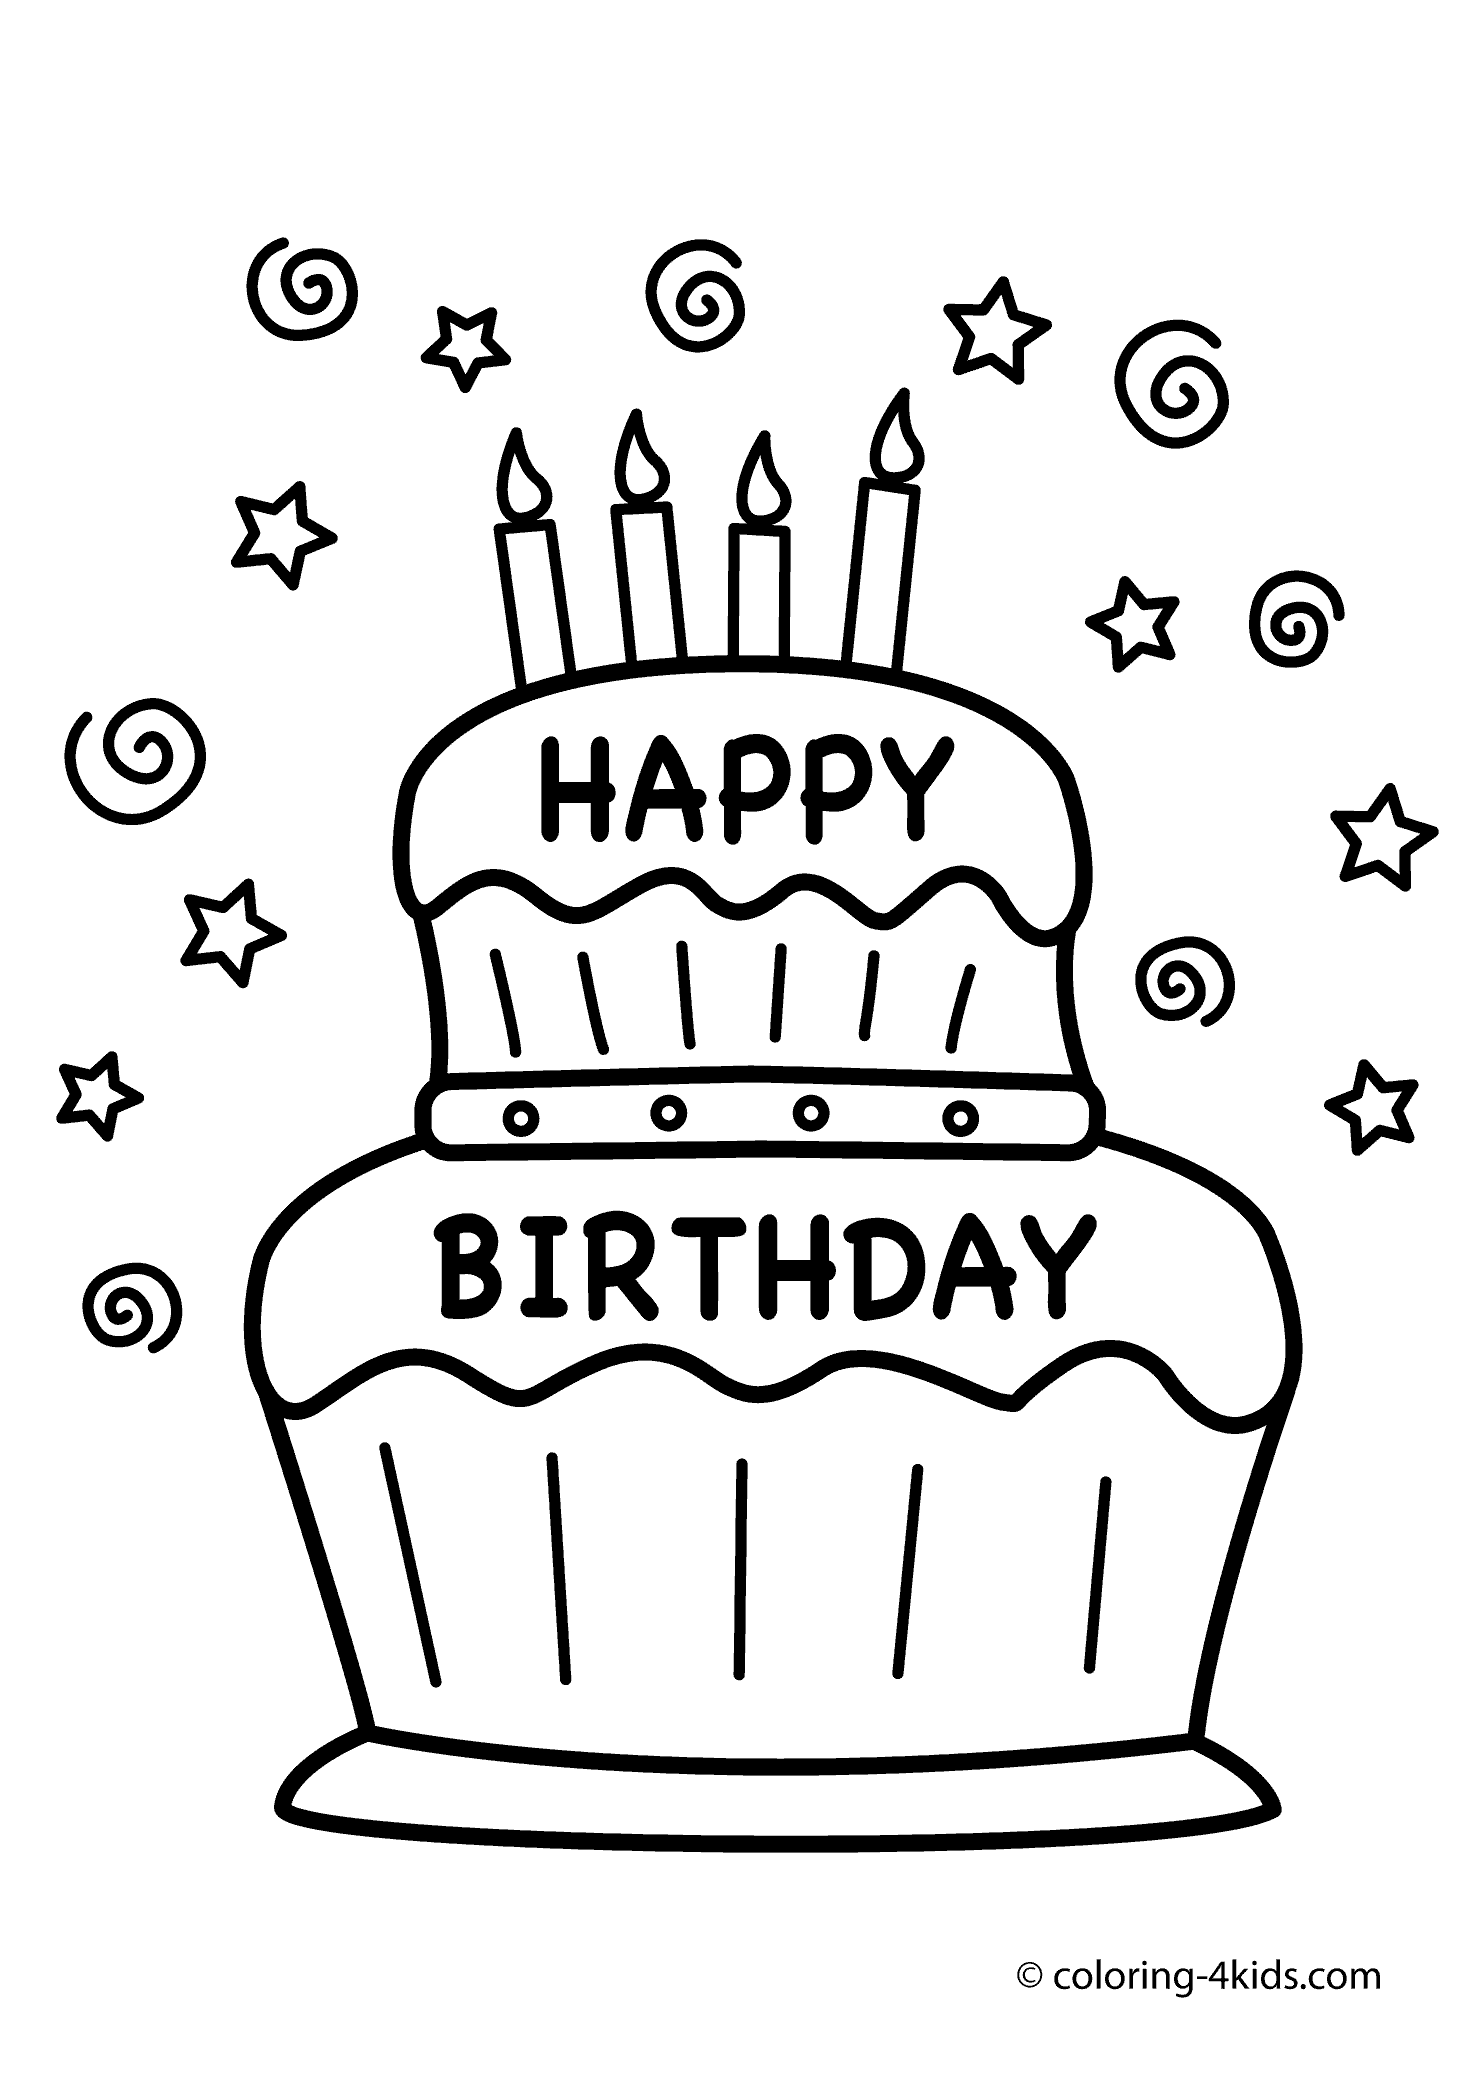 coloring page of a birthday cake cake coloring pages getcoloringpagescom coloring of cake a page birthday 